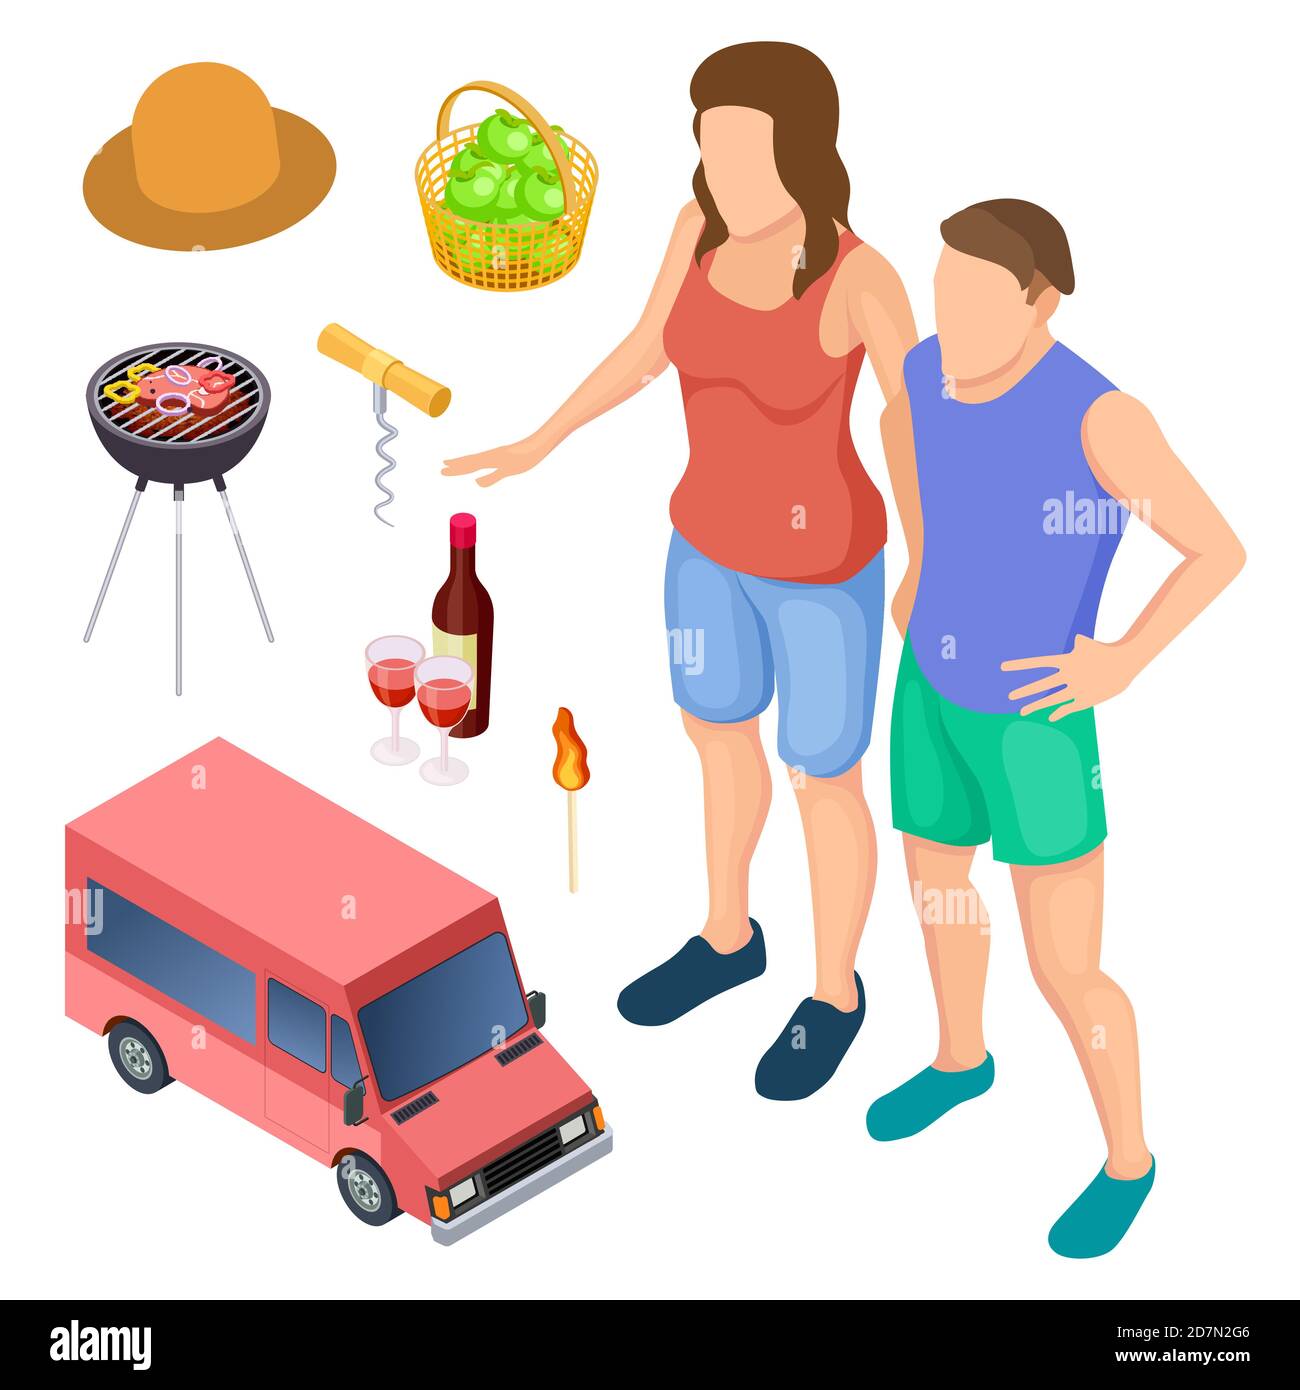 Male and female campers and camping accessories isometric vector elements. Illustration of woman and man barbecue cooking Stock Vector